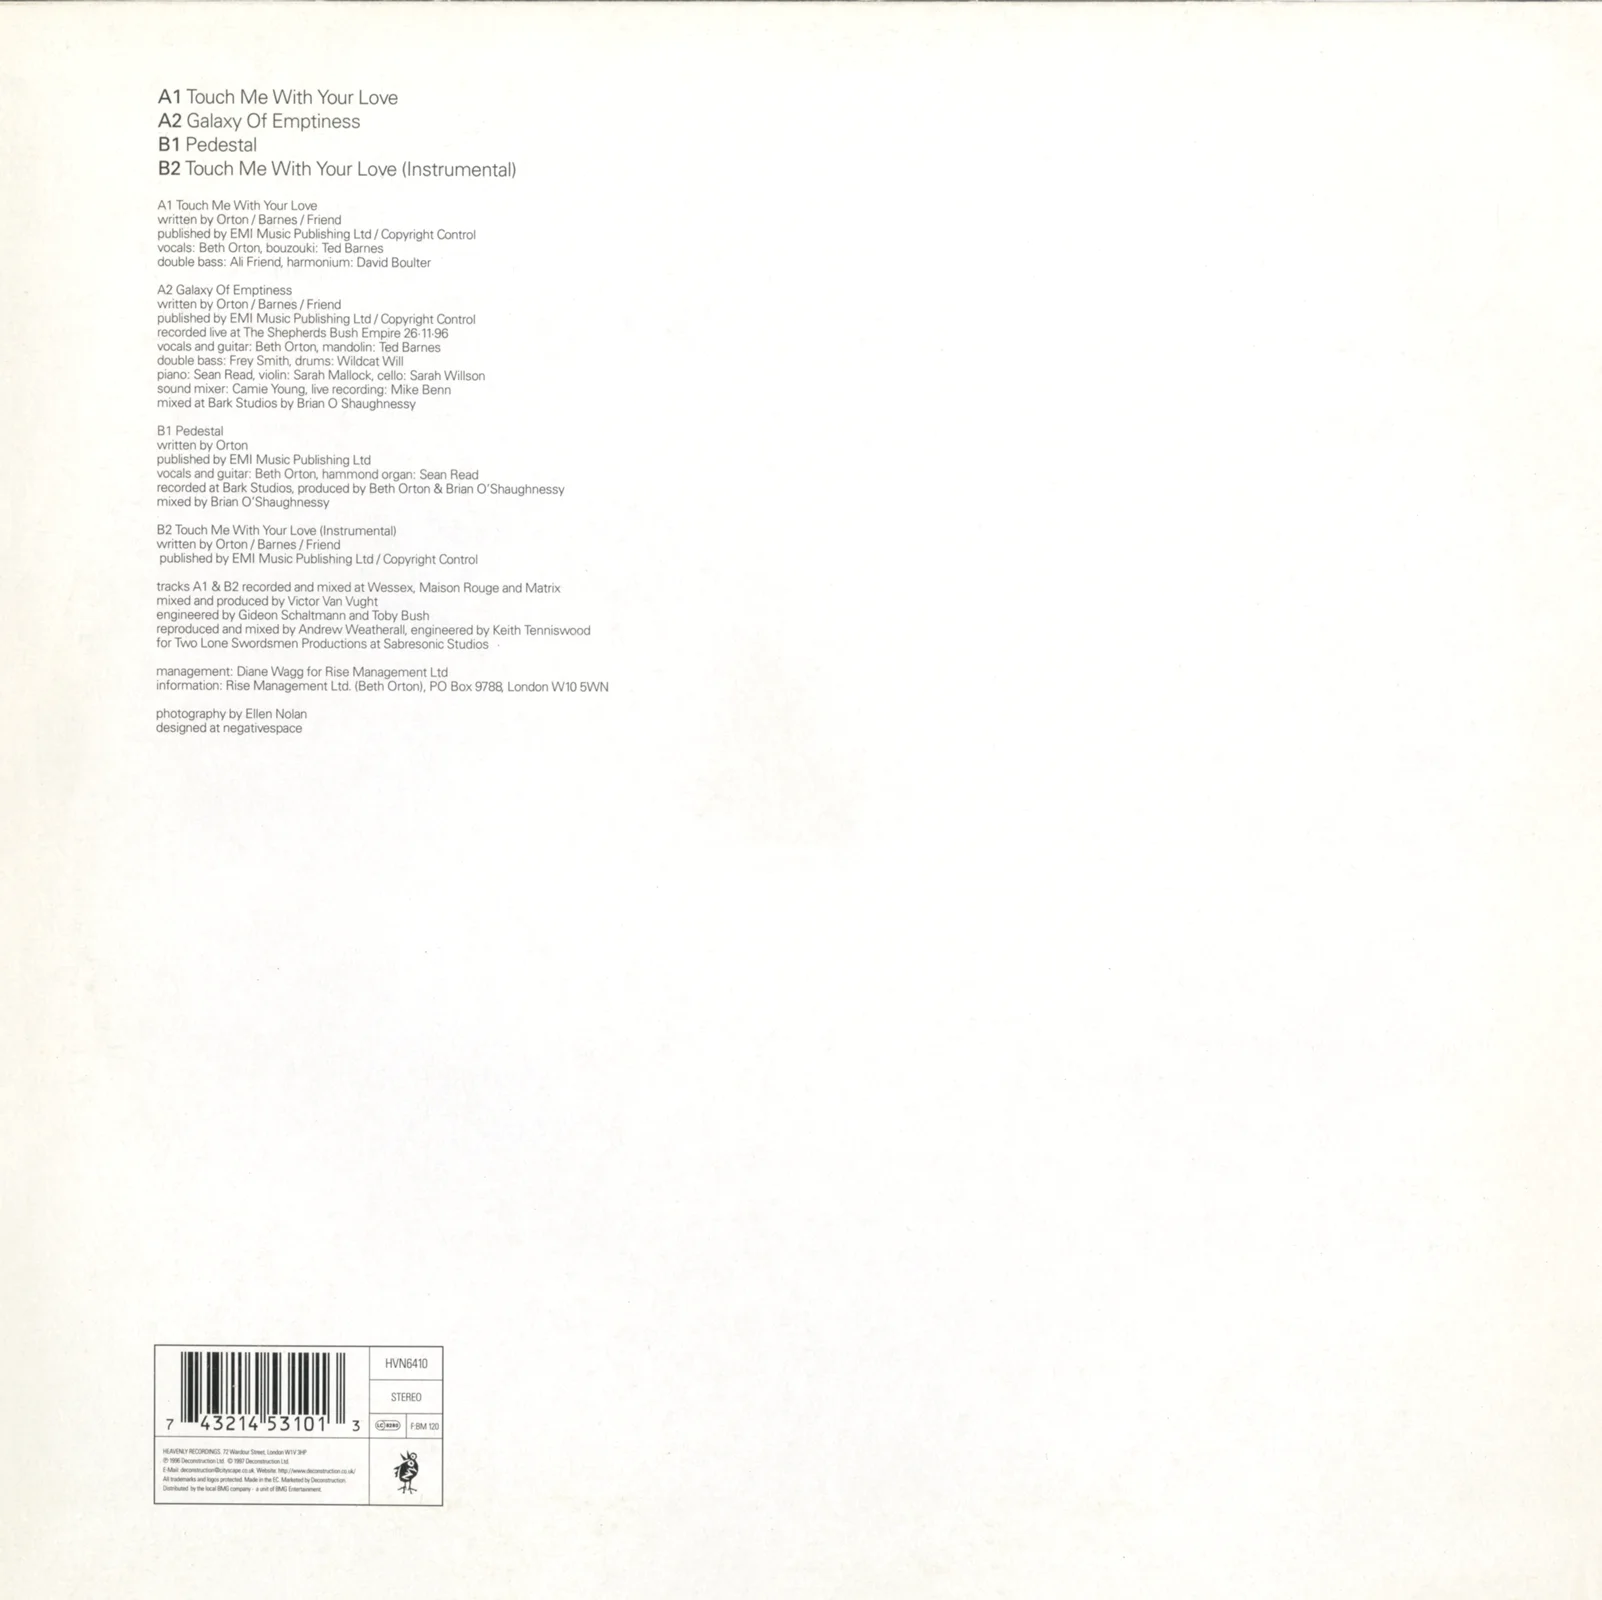 Touch Me With Your Love back cover